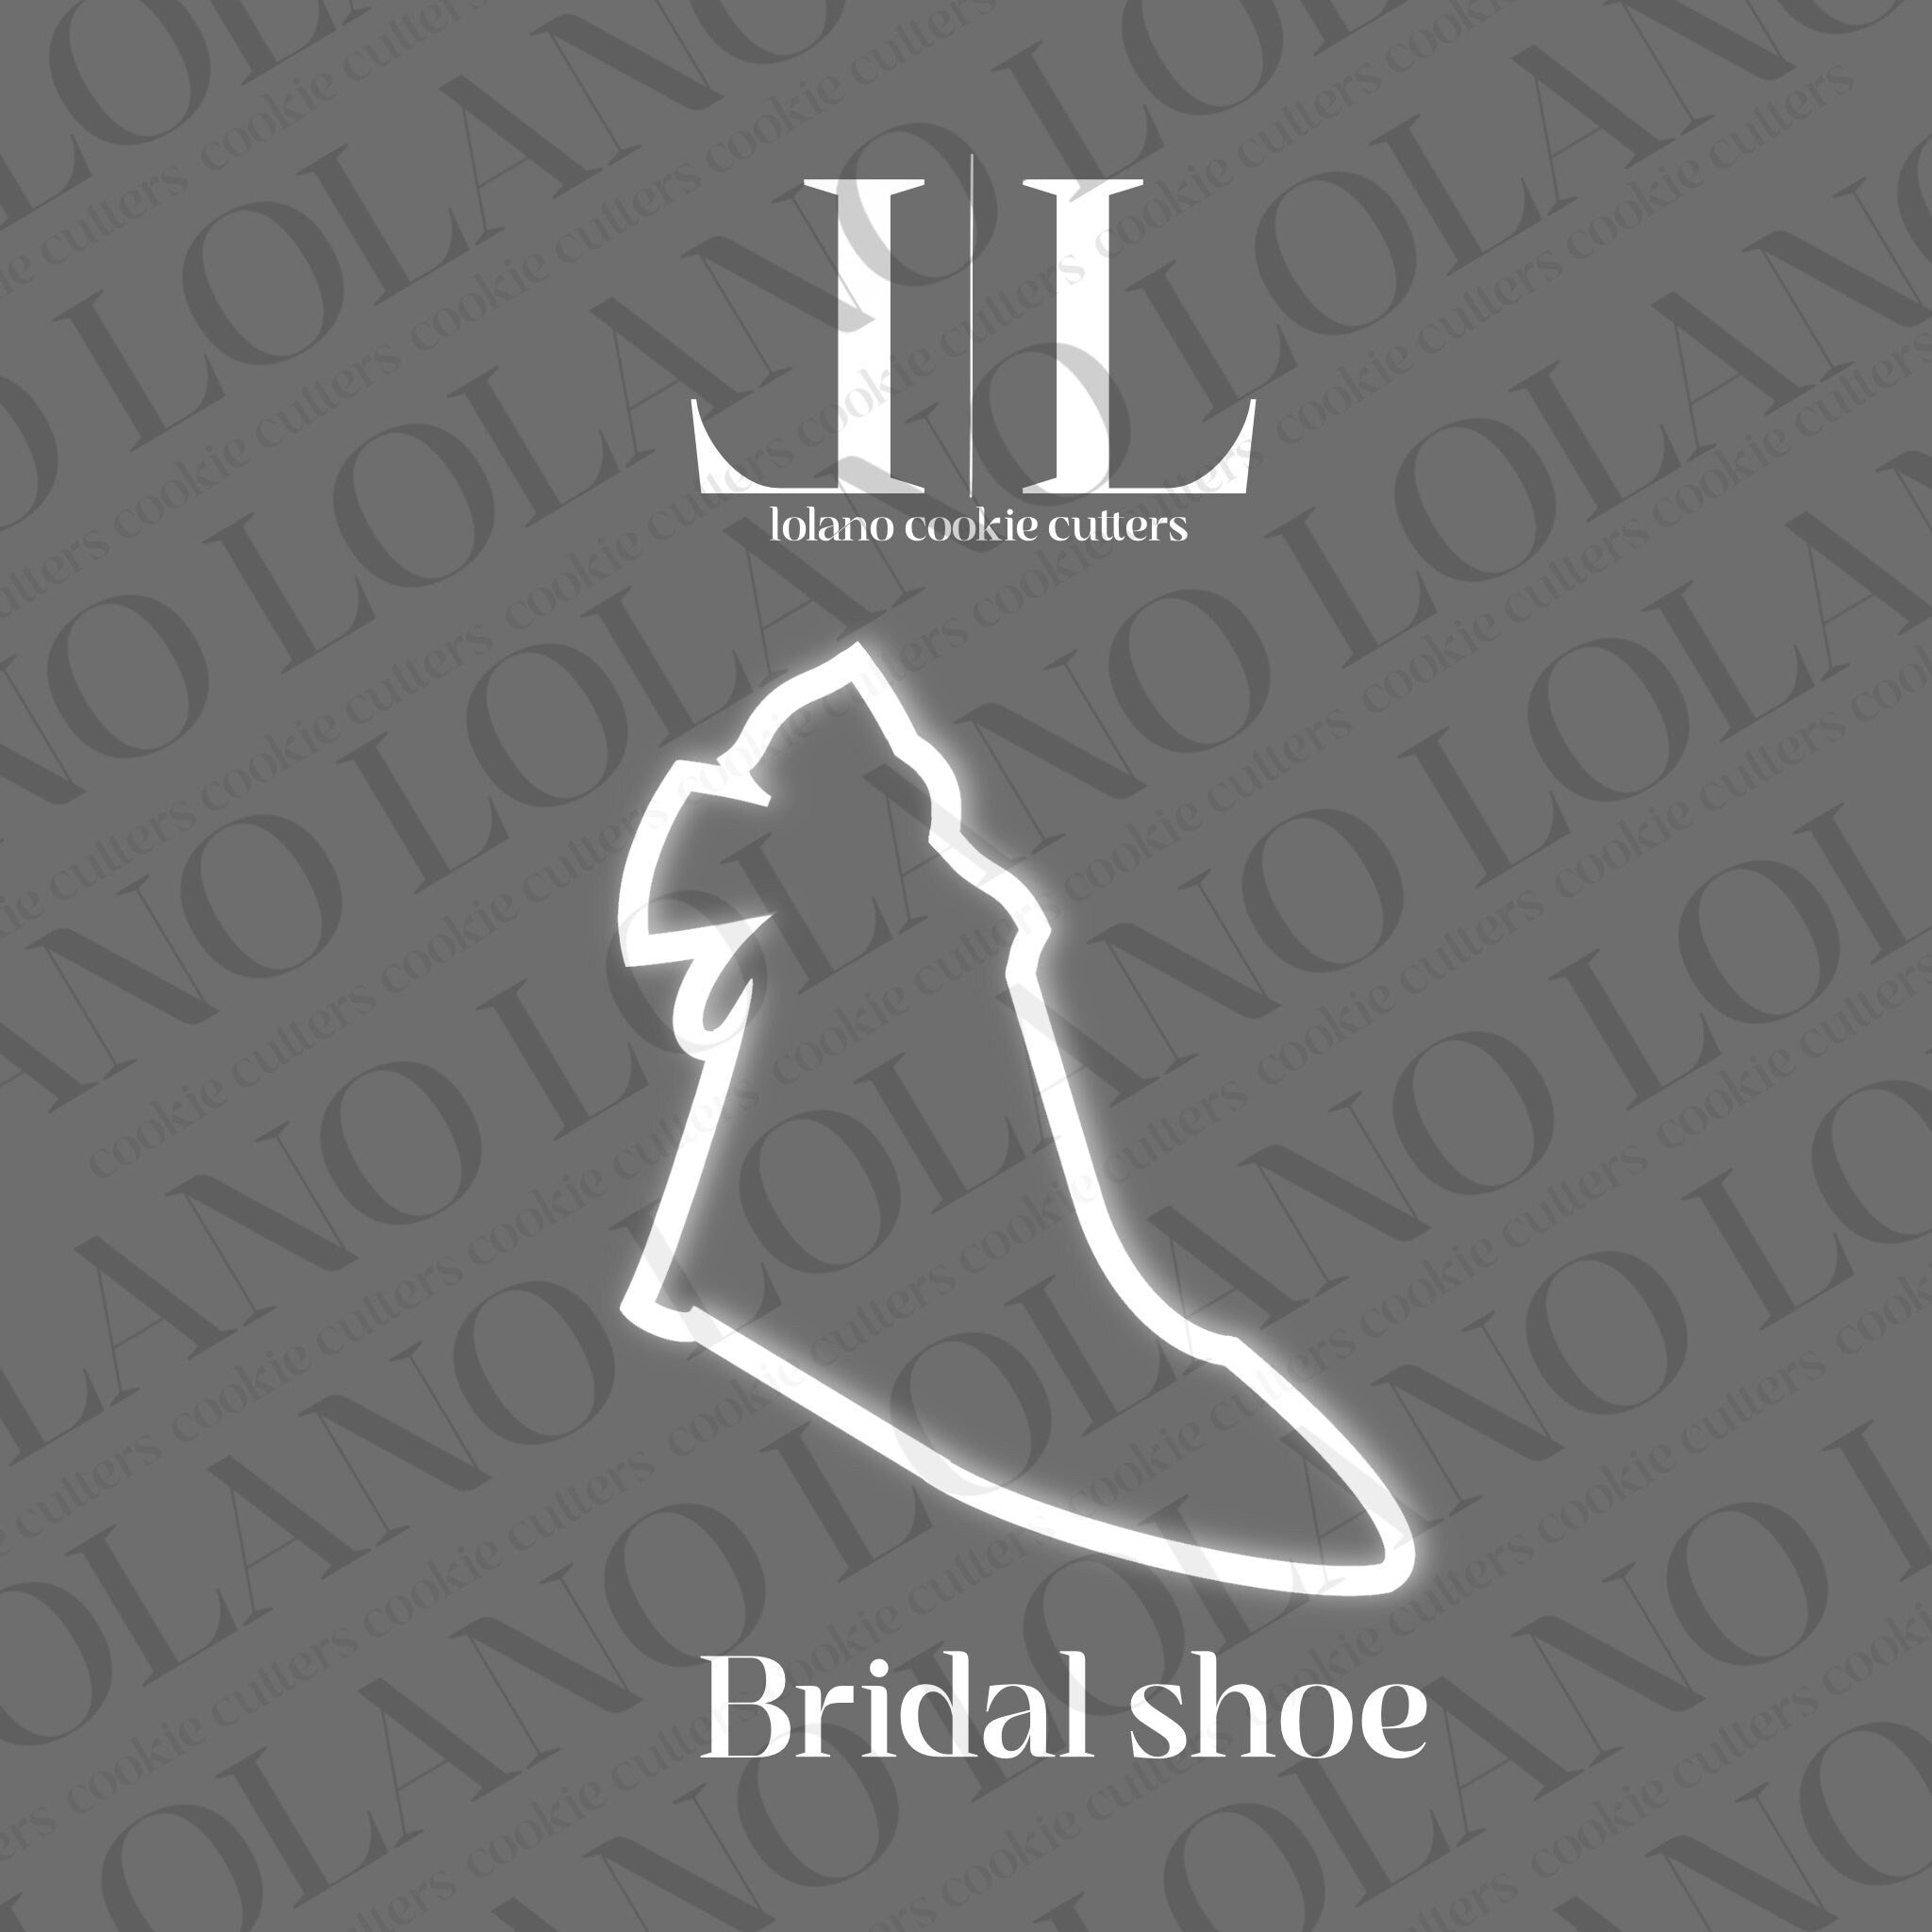 Bride and groom’s shoe cookie cutters